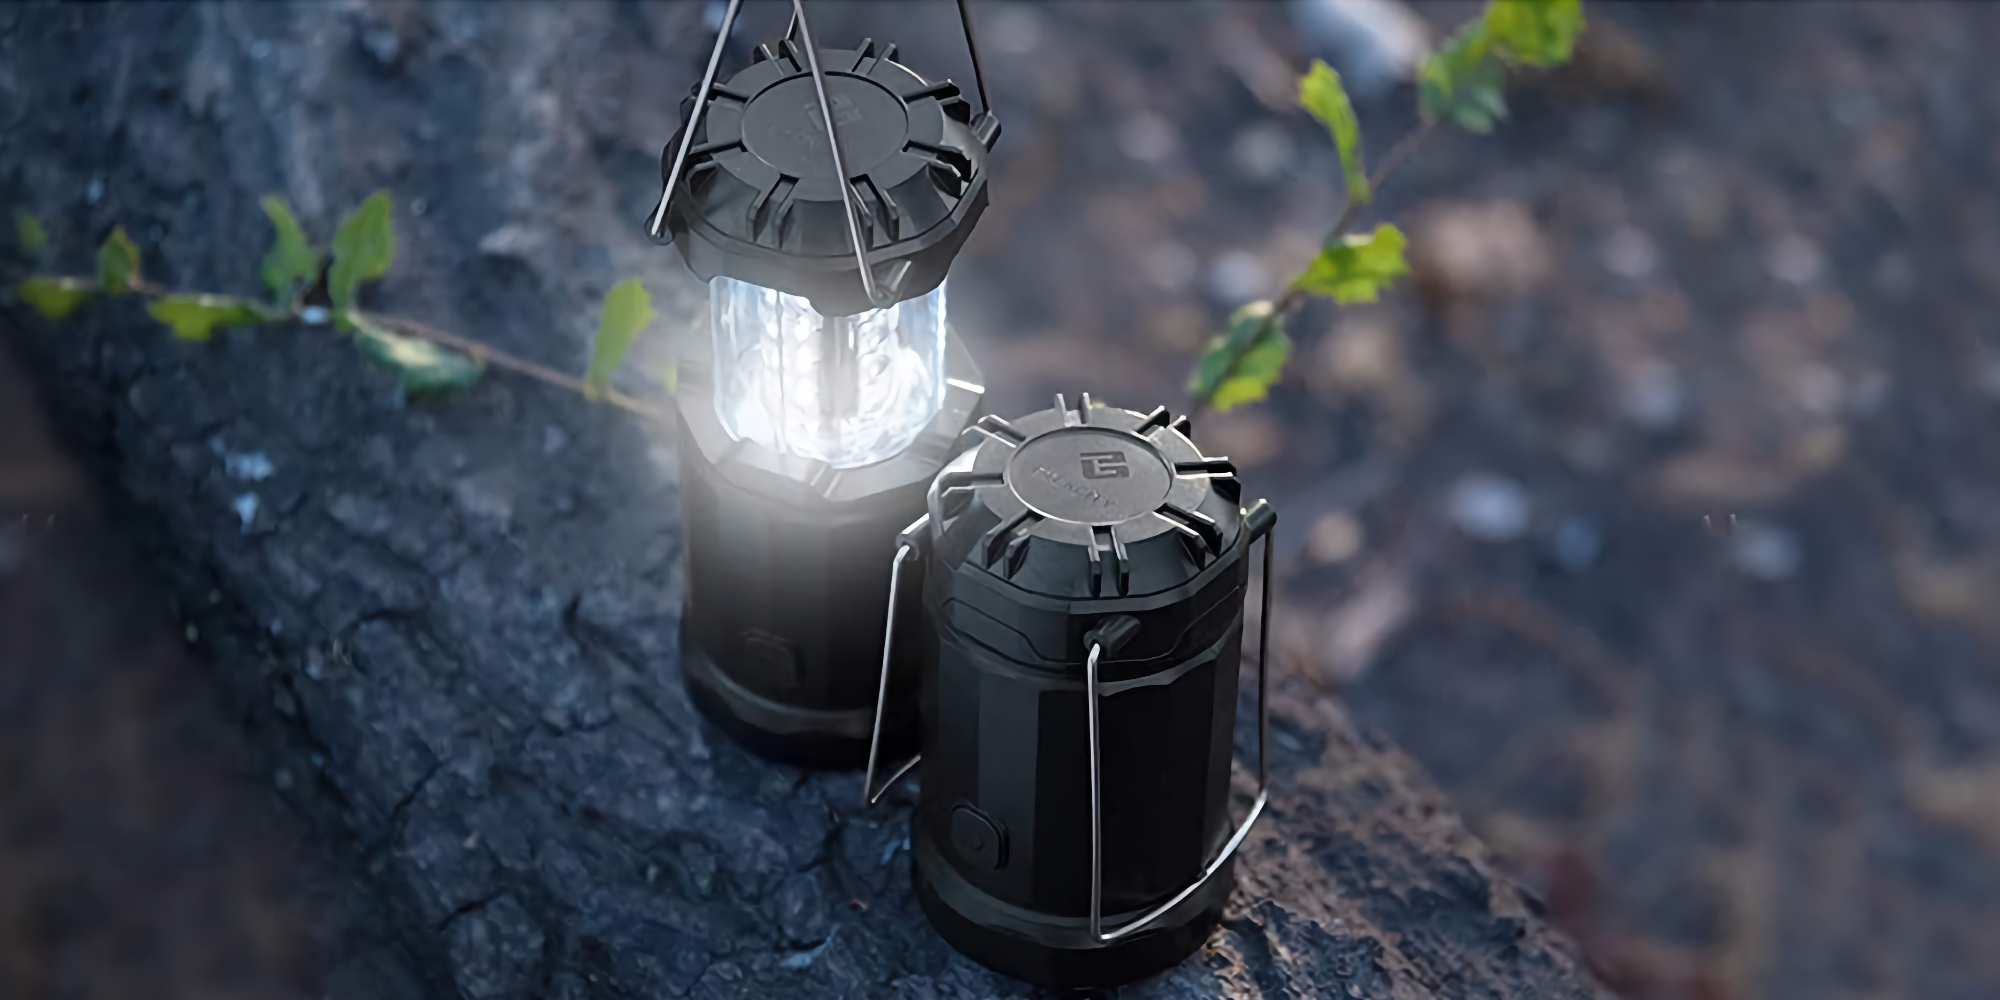 Etekcity Lantern Camping Lantern Battery Powered Led for Power Outages,  Emergency Light for Home, Hiking, Camping Gear Accessories, Portable